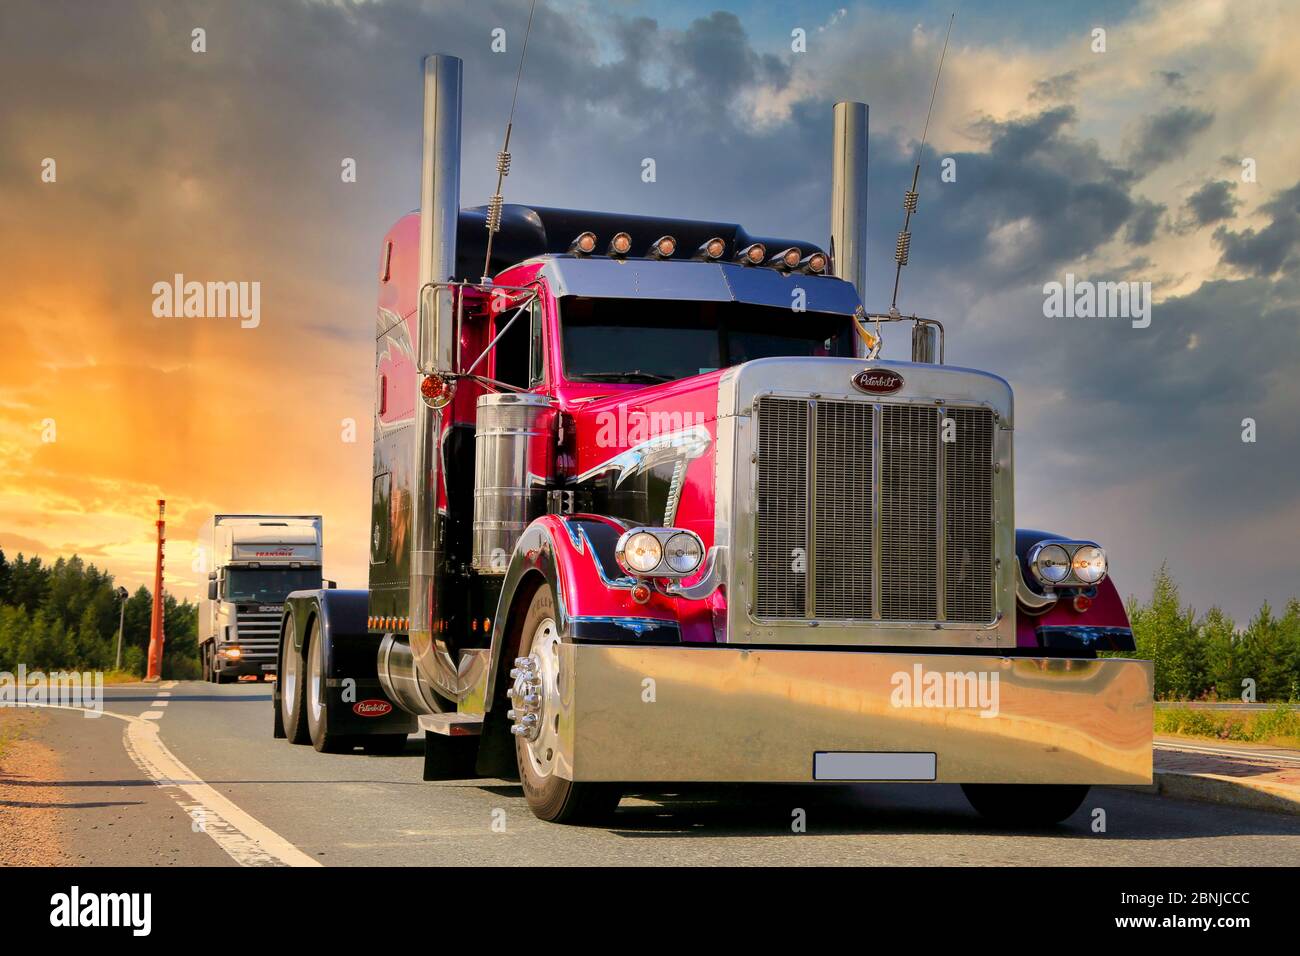 American Show truck tractor Peterbilt 379 bobtailing with sunset sky background. Stock Photo